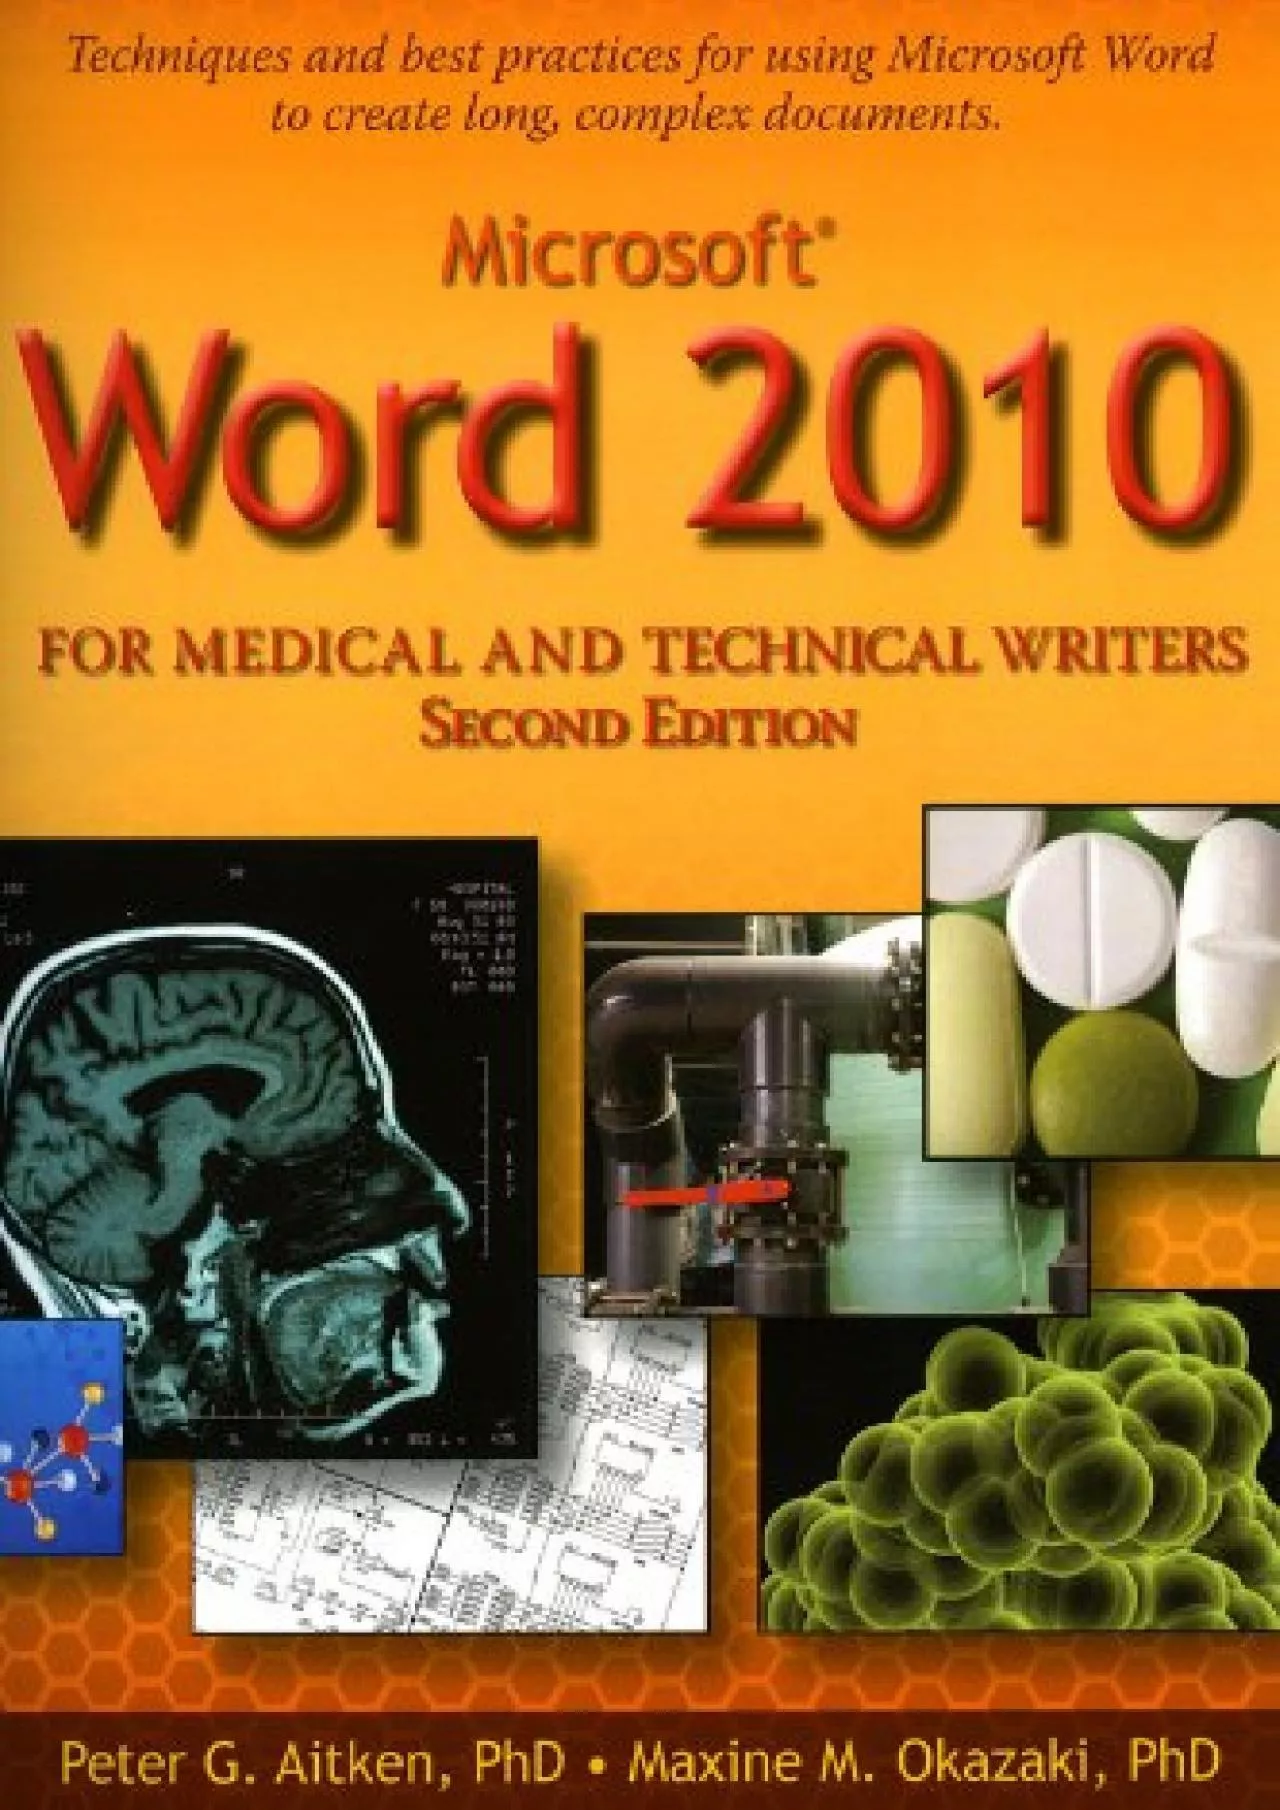 (EBOOK)-Microsoft Word 2010 for Medical and Technical Writers